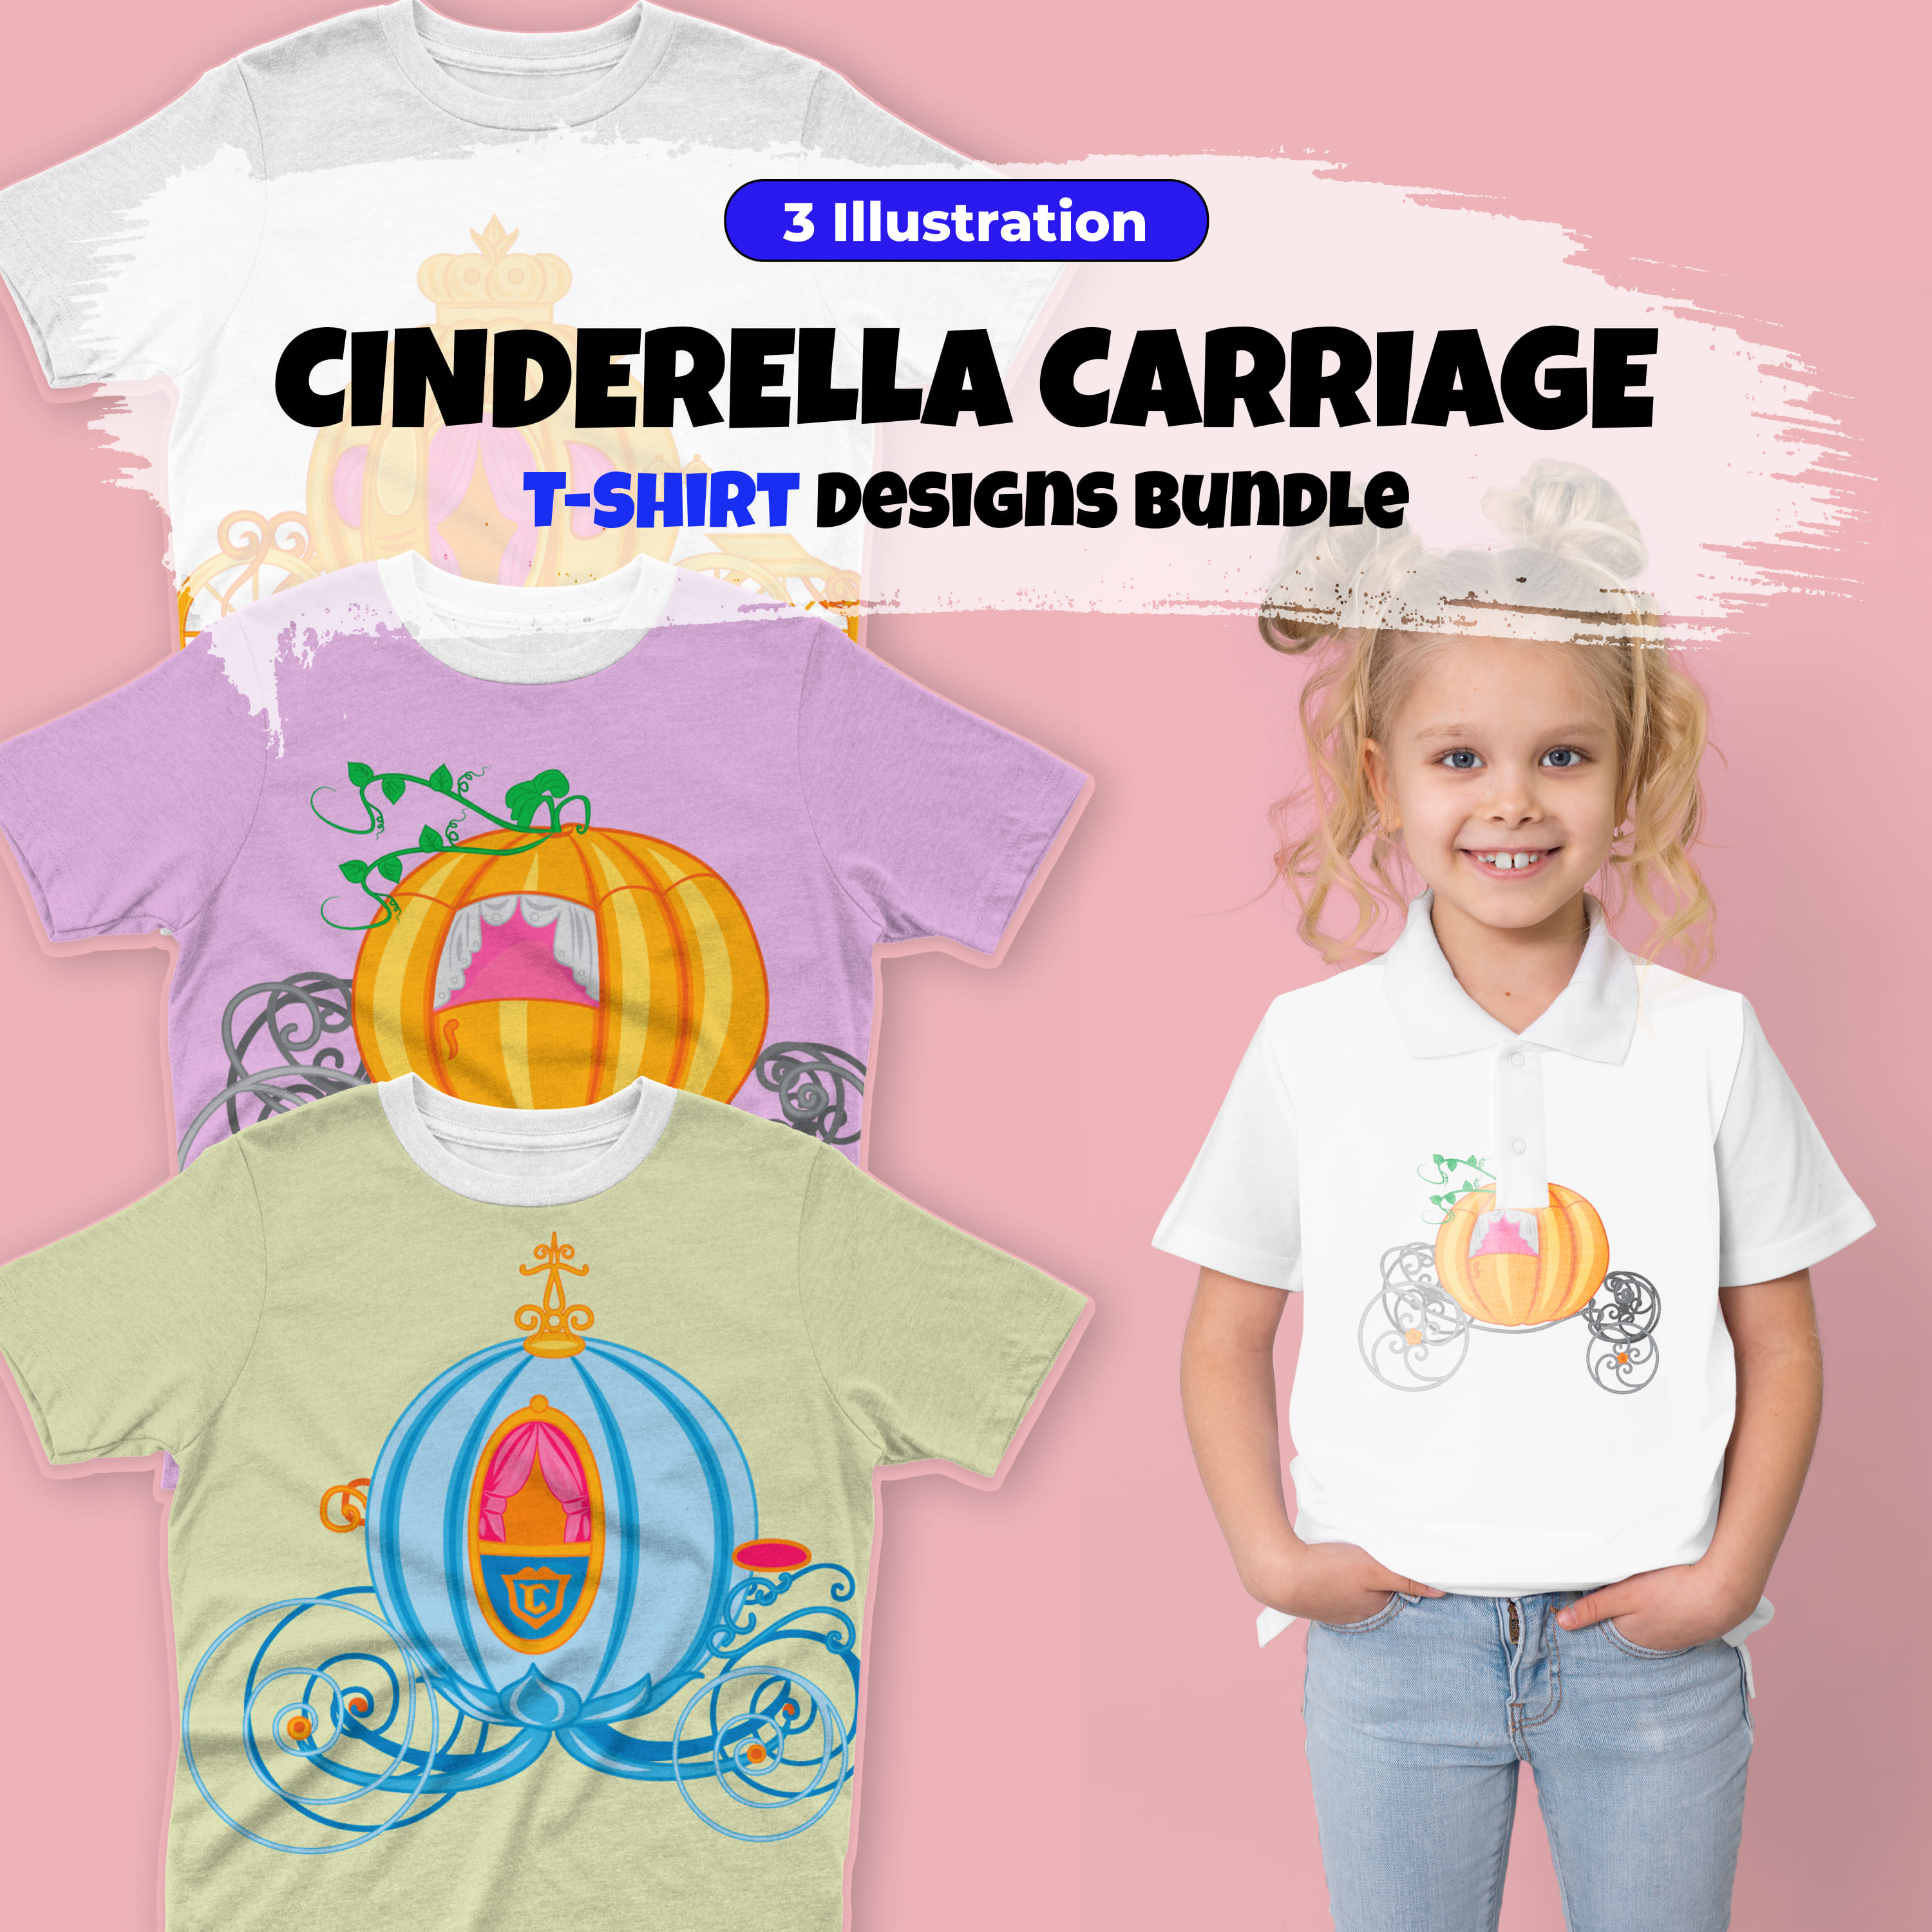 Bundle of t-shirt images with amazing Cinderella's carriage print.